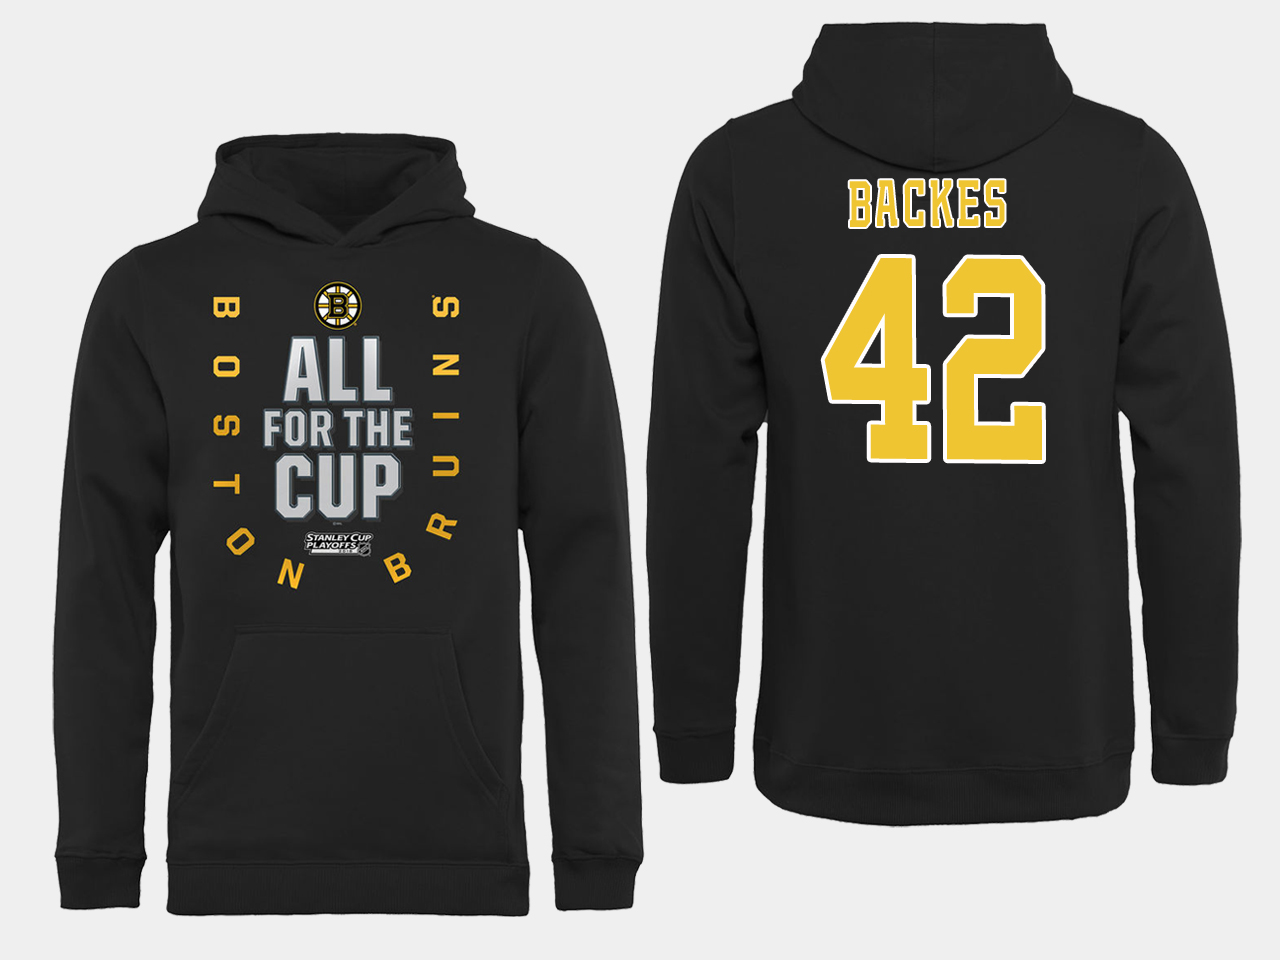 NHL Men Boston Bruins 42 Backes Black All for the Cup Hoodie